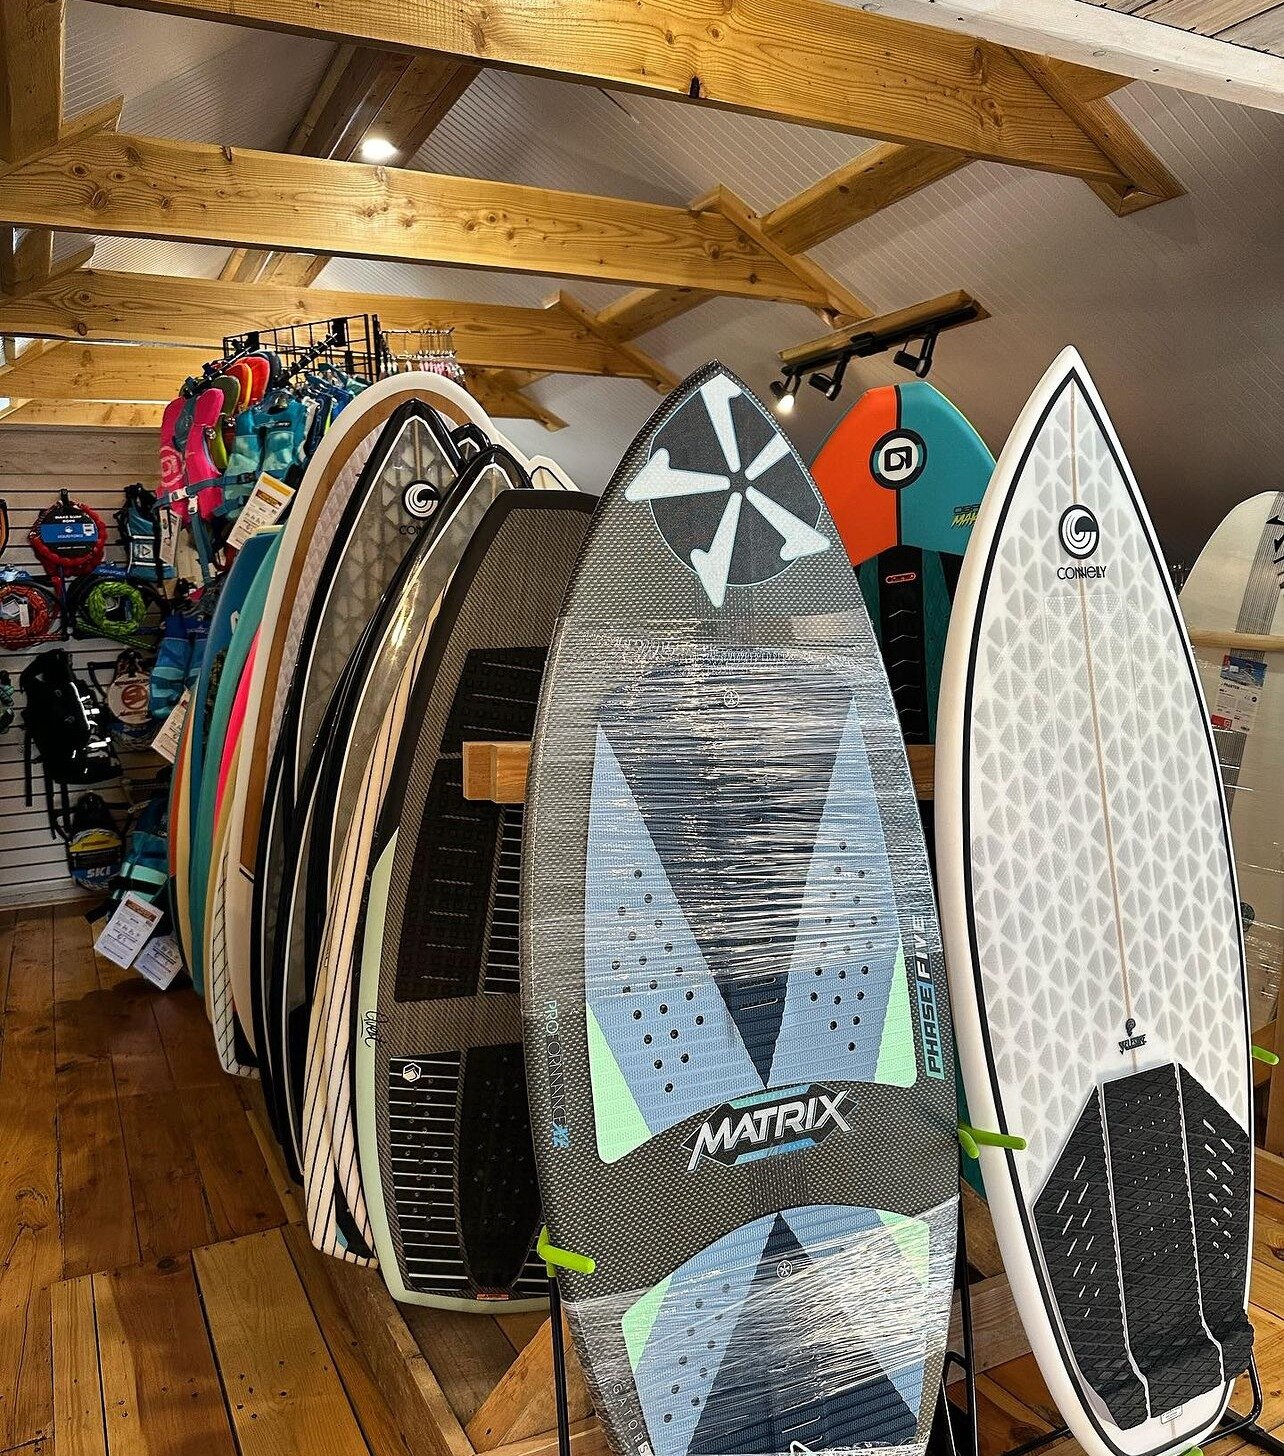 #ILLUME Exhibitor: @csurf_board_shop

With a passionate team of experts online and in-store ready to help, C Surf offers the best advice on choosing gear tailored to your needs. Explore their range of watersport gear, from wakesurf to wakeboard, wate